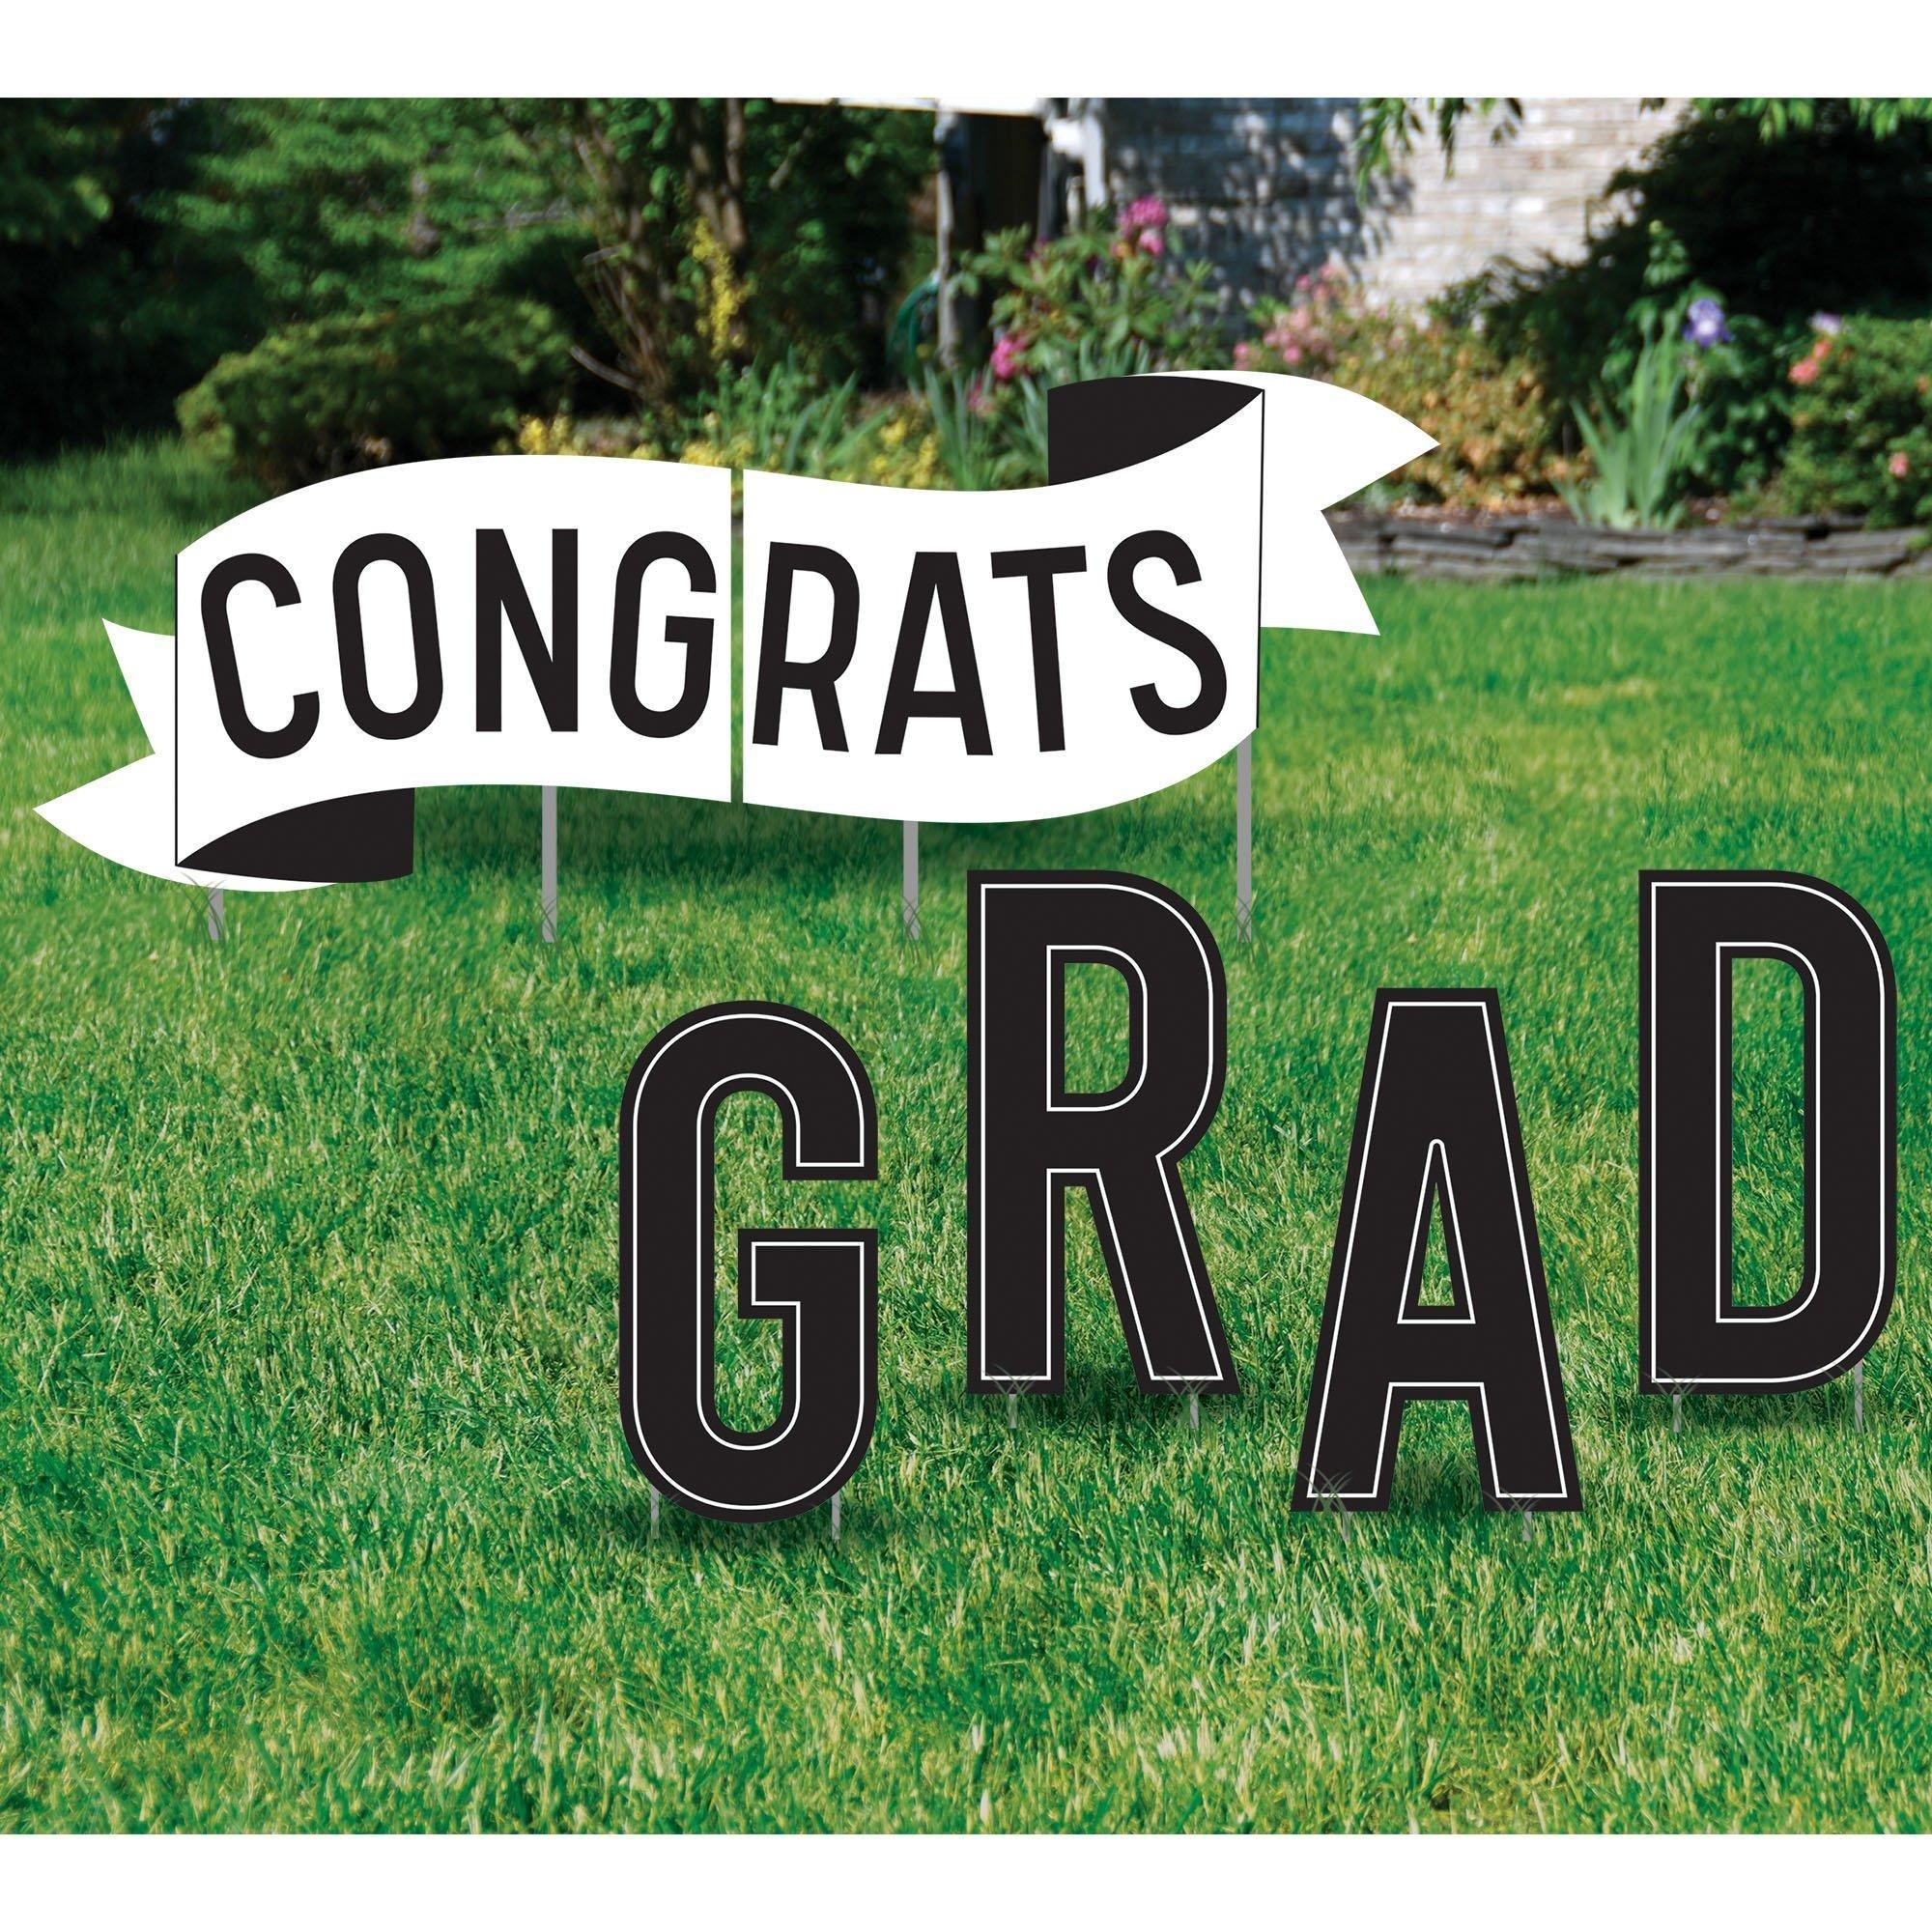 Graduation Party Outdoor Decorations Kit with Banners, Balloons, Yard Signs - Orange 2024 Congrats Grad